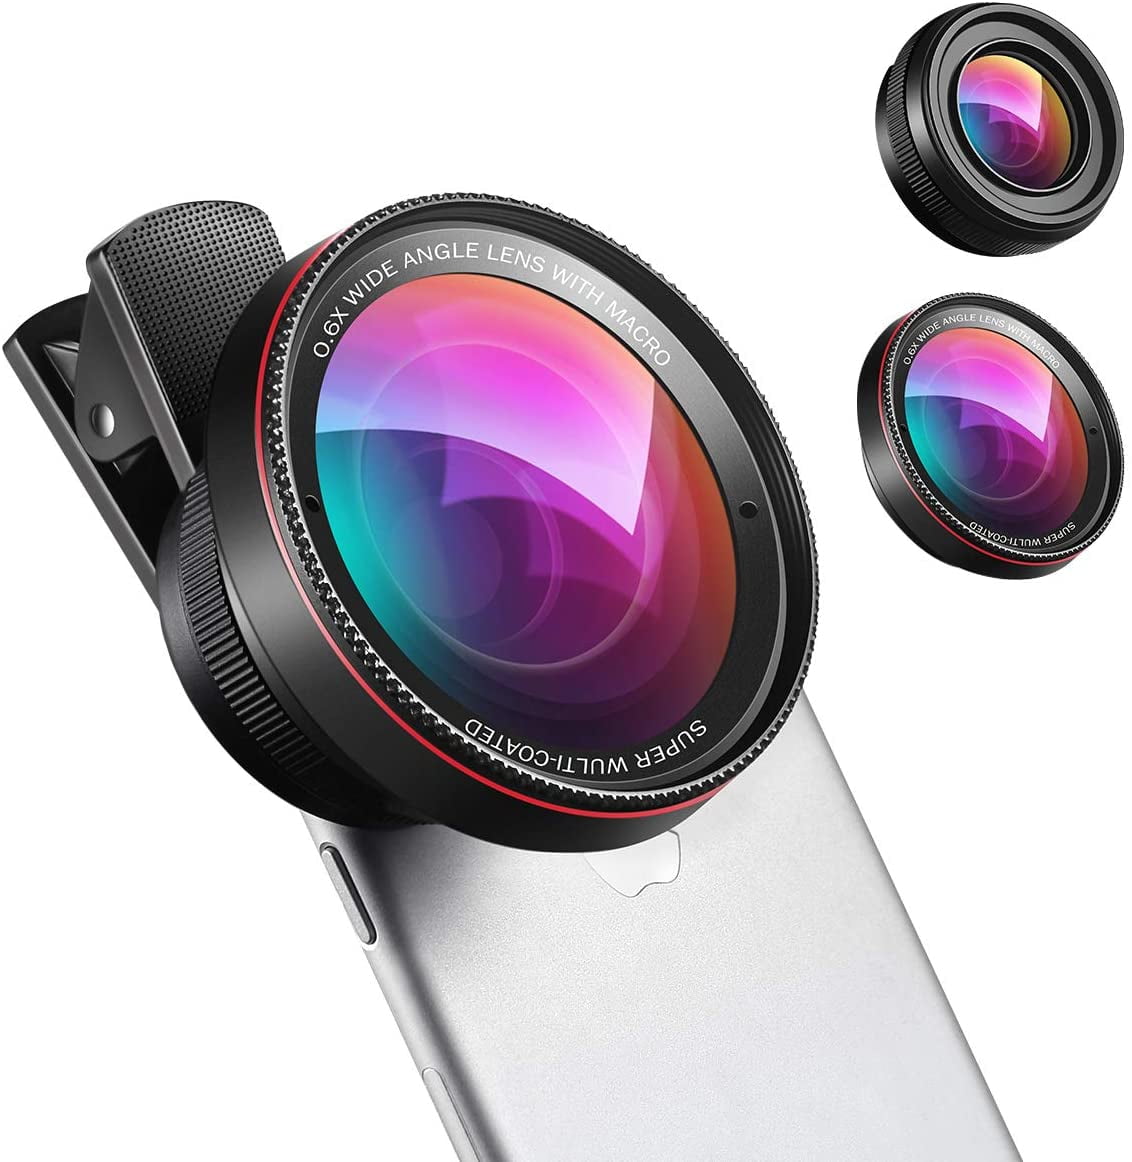 15X Super Macro Lens with Clip for iPhones Black HTC Camera Phones Smartphone Camera Lens Kit Samsung 12x Zoom Telephoto Lens with 0.45X Wide Angle Lens 